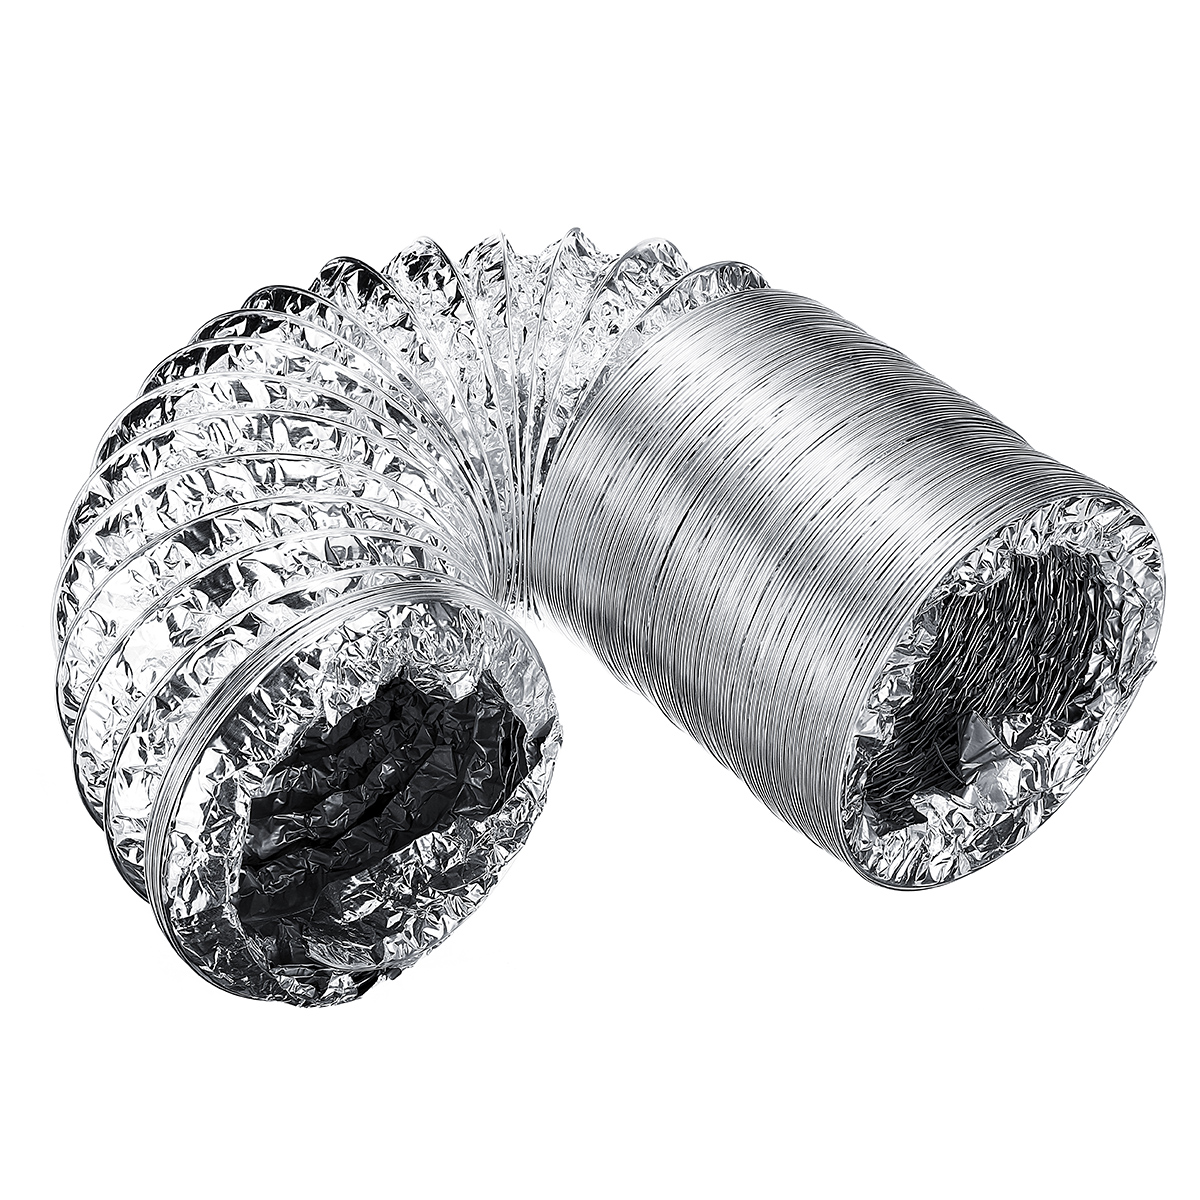 Find 4 Inch 100mm Air Ventilation Fan Pipe Hose Flexible Aluminum Exhaust Duct 2m/3m Length for Sale on Gipsybee.com with cryptocurrencies